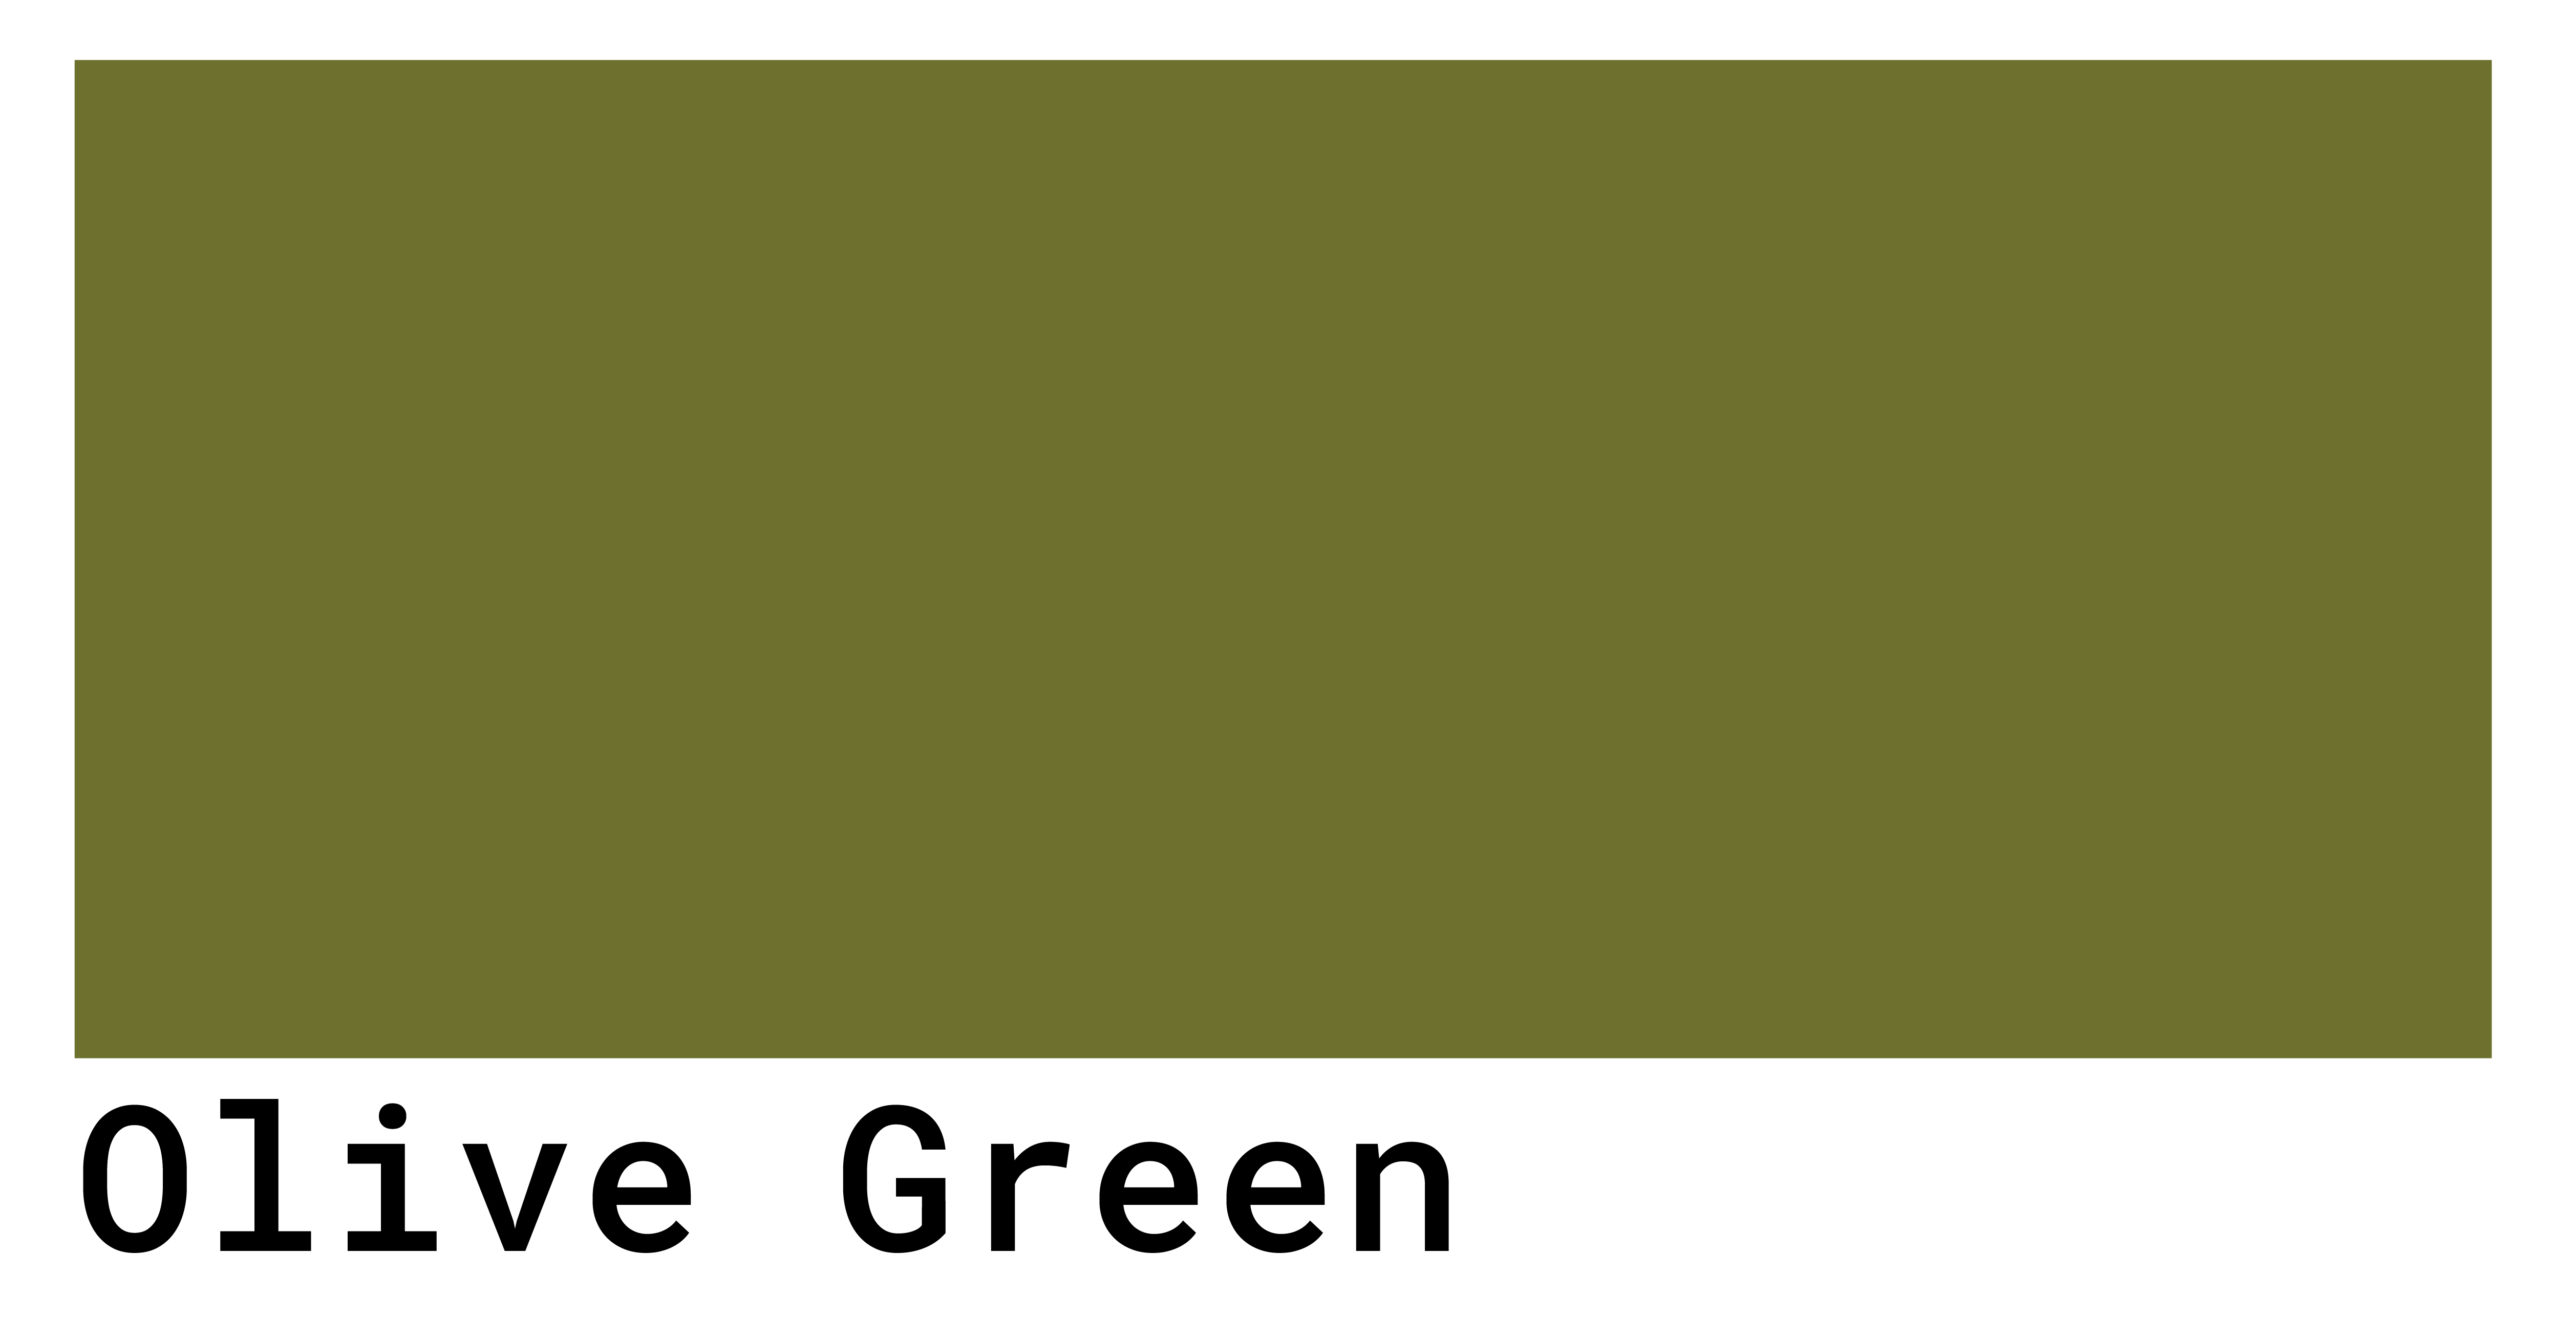 Olive Green Color Codes - The Hex, RGB and CMYK Values That You Need. sourc...